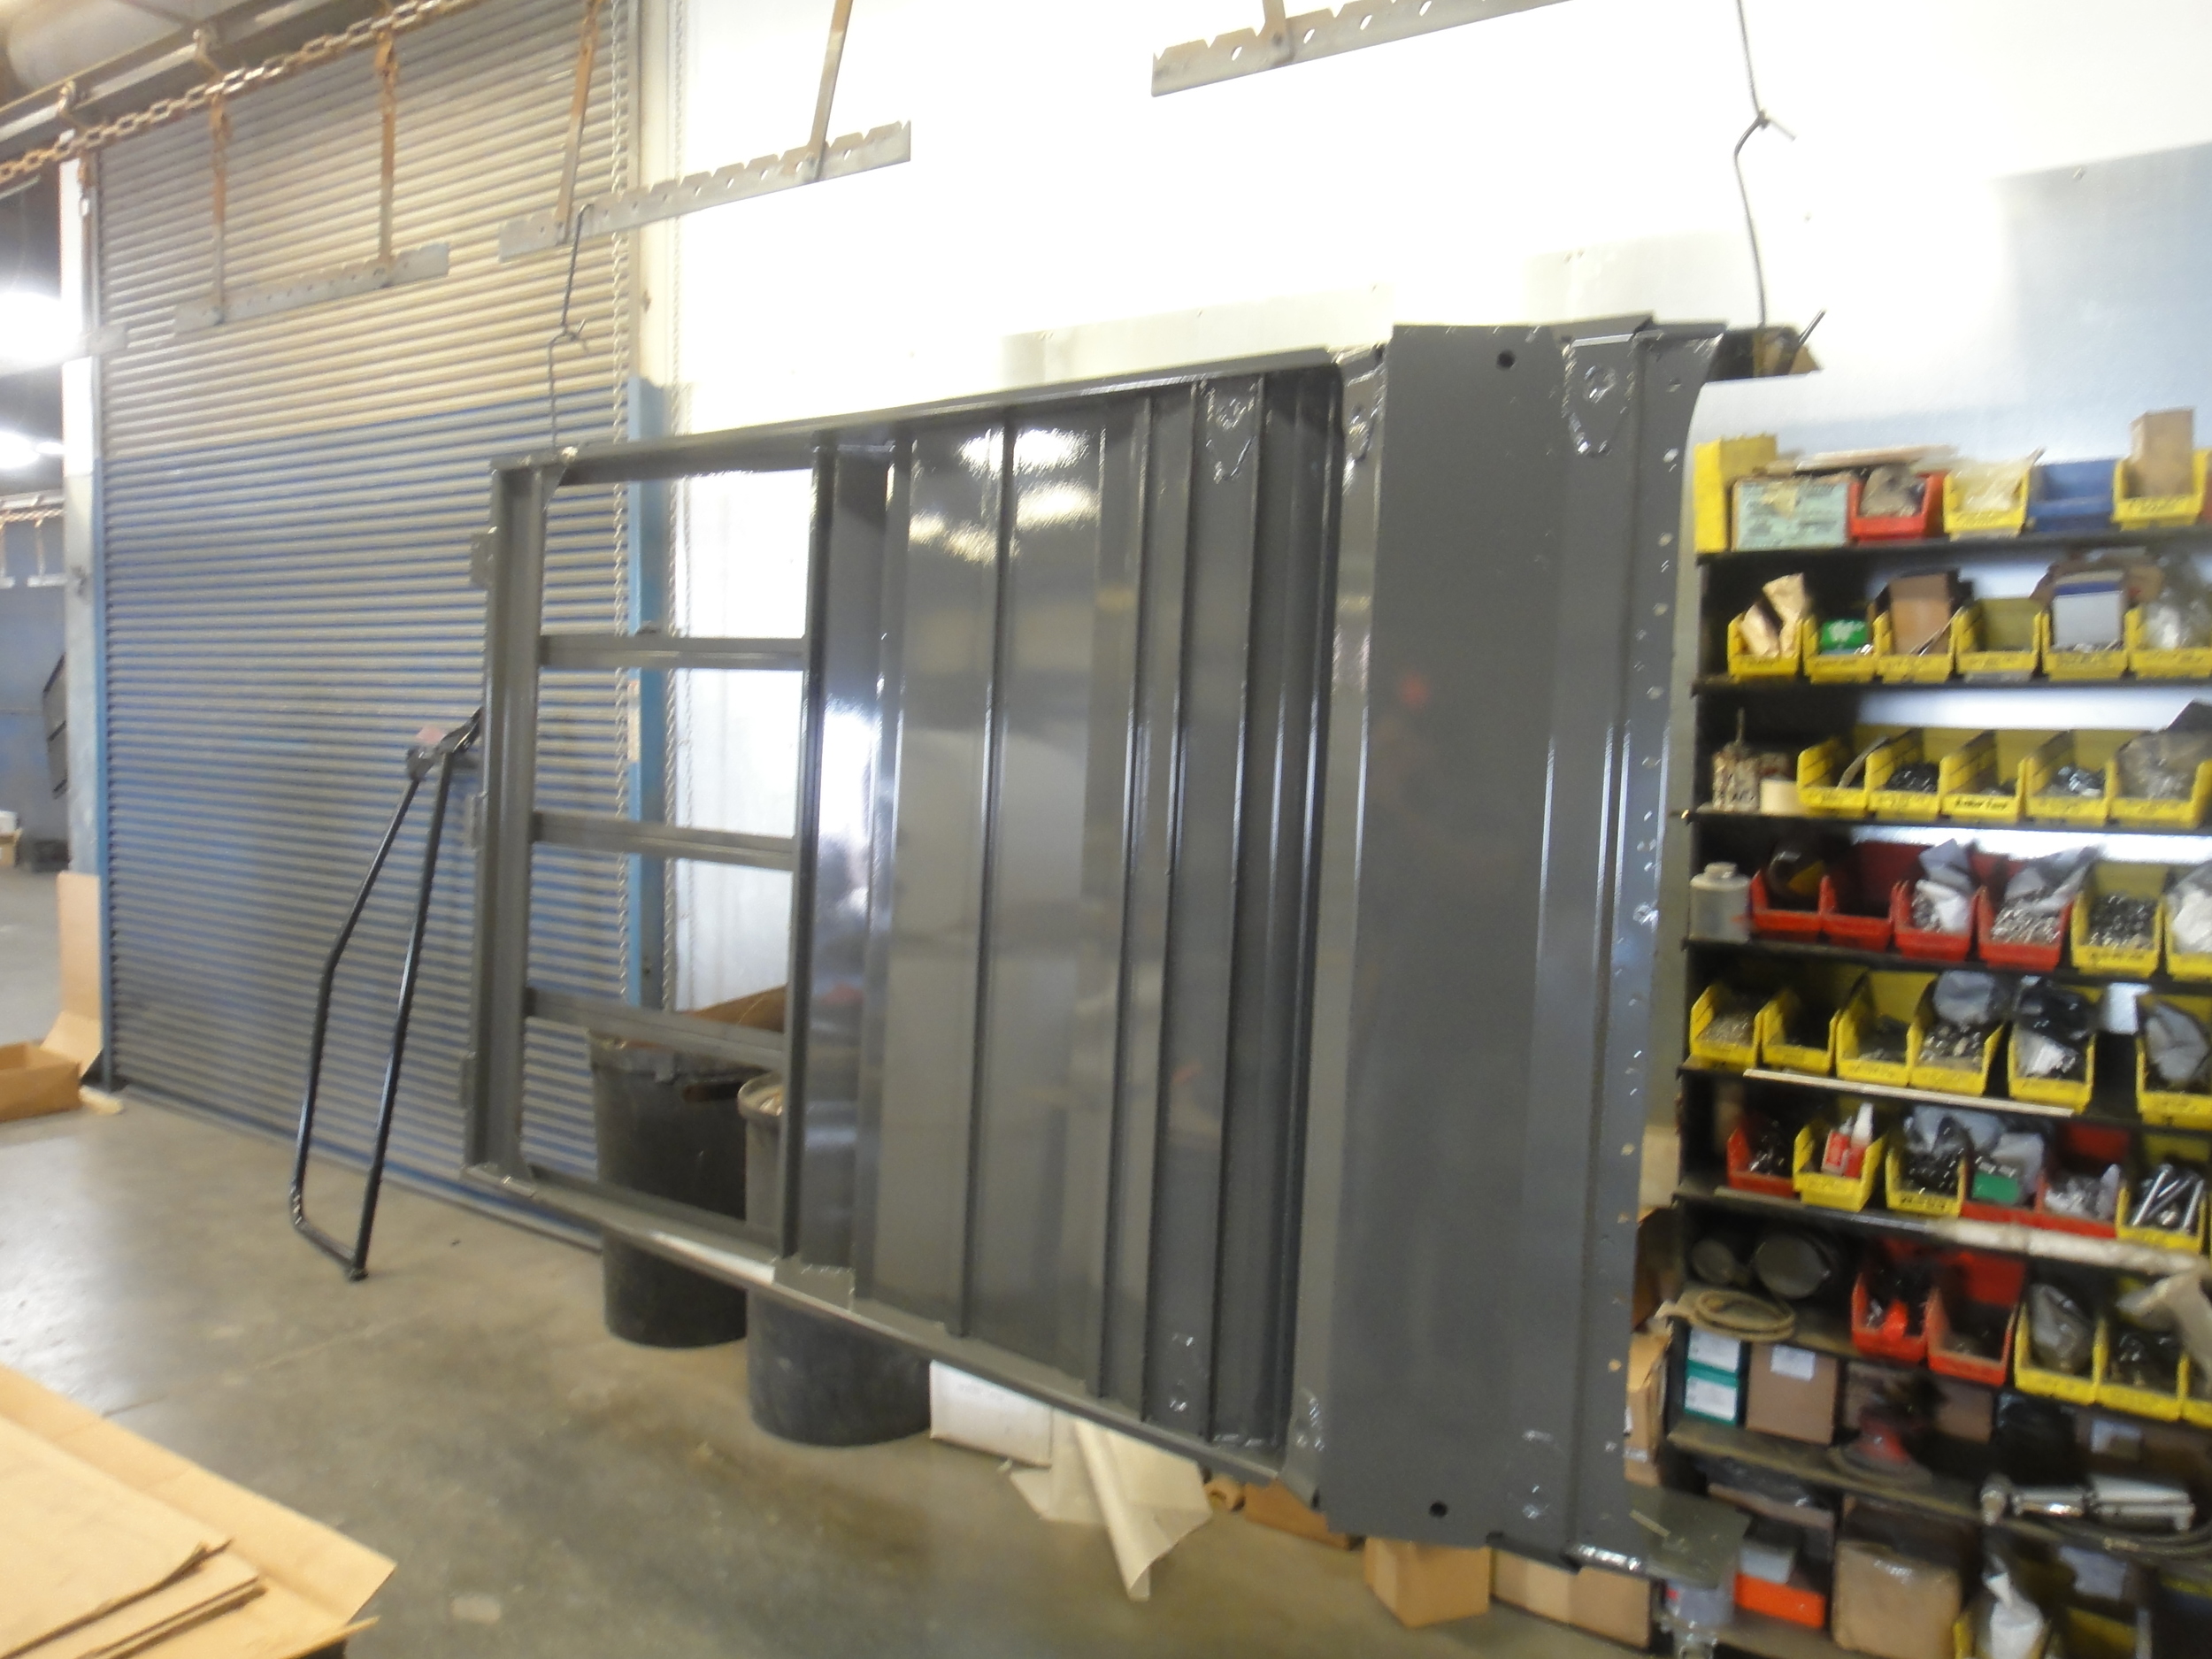 Industrial Powder Coating Services, EDCO Fabrication